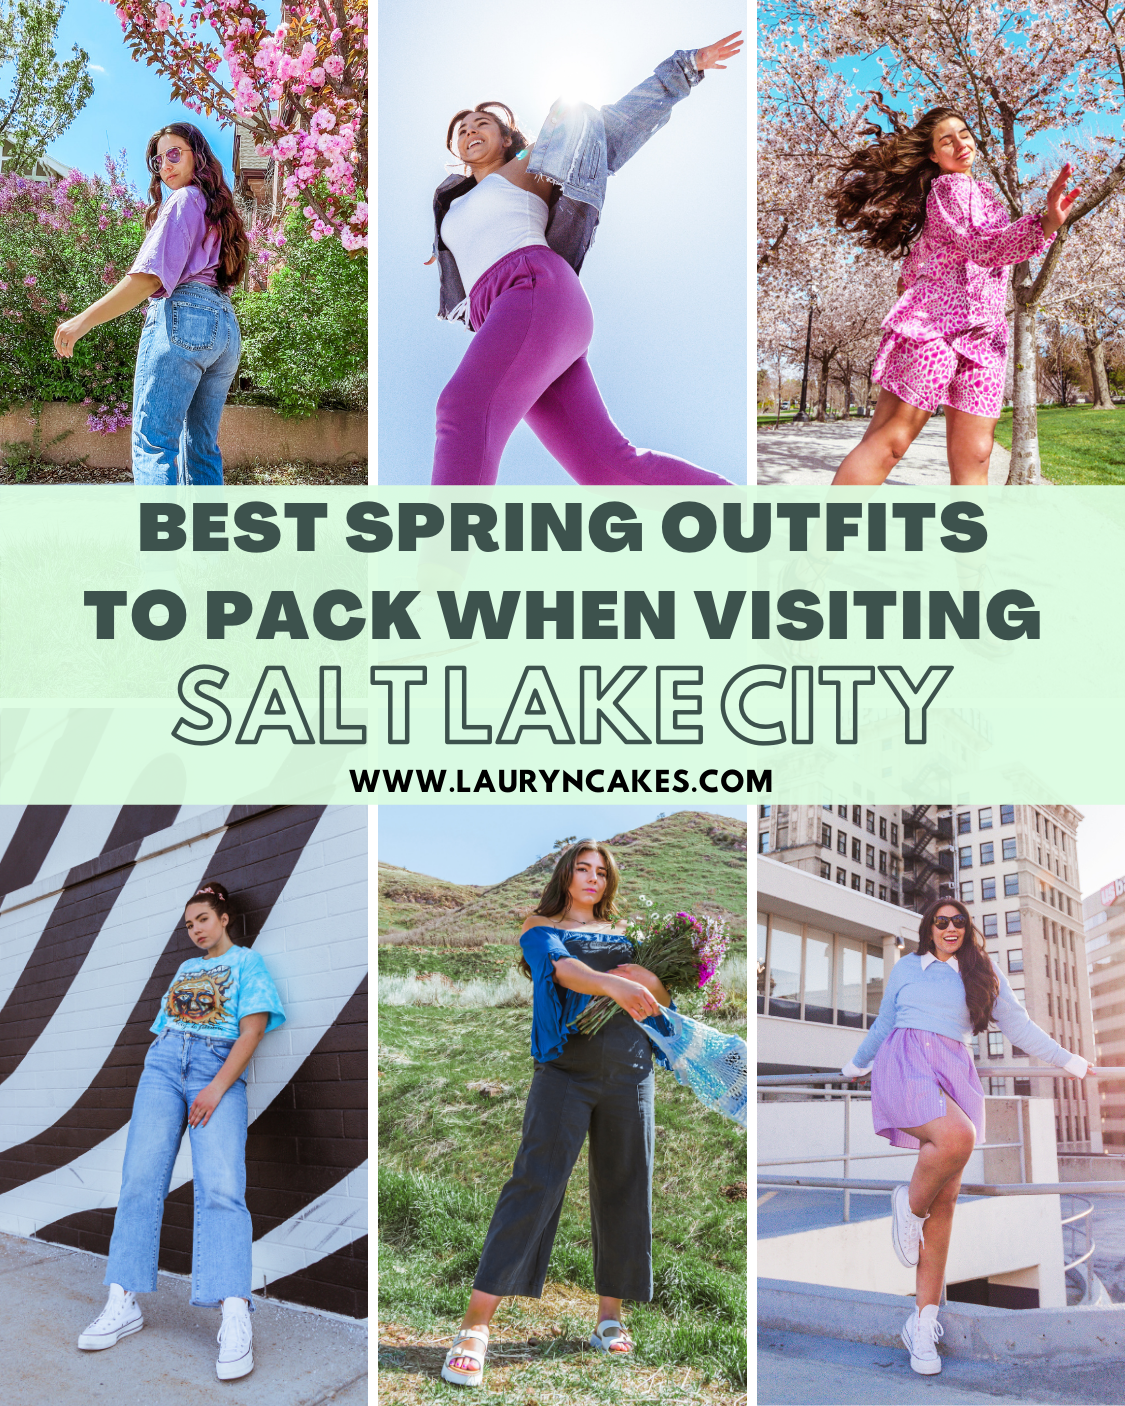 Salt Lake City, Utah: Outfits to Wear in the Spring - Lauryncakes